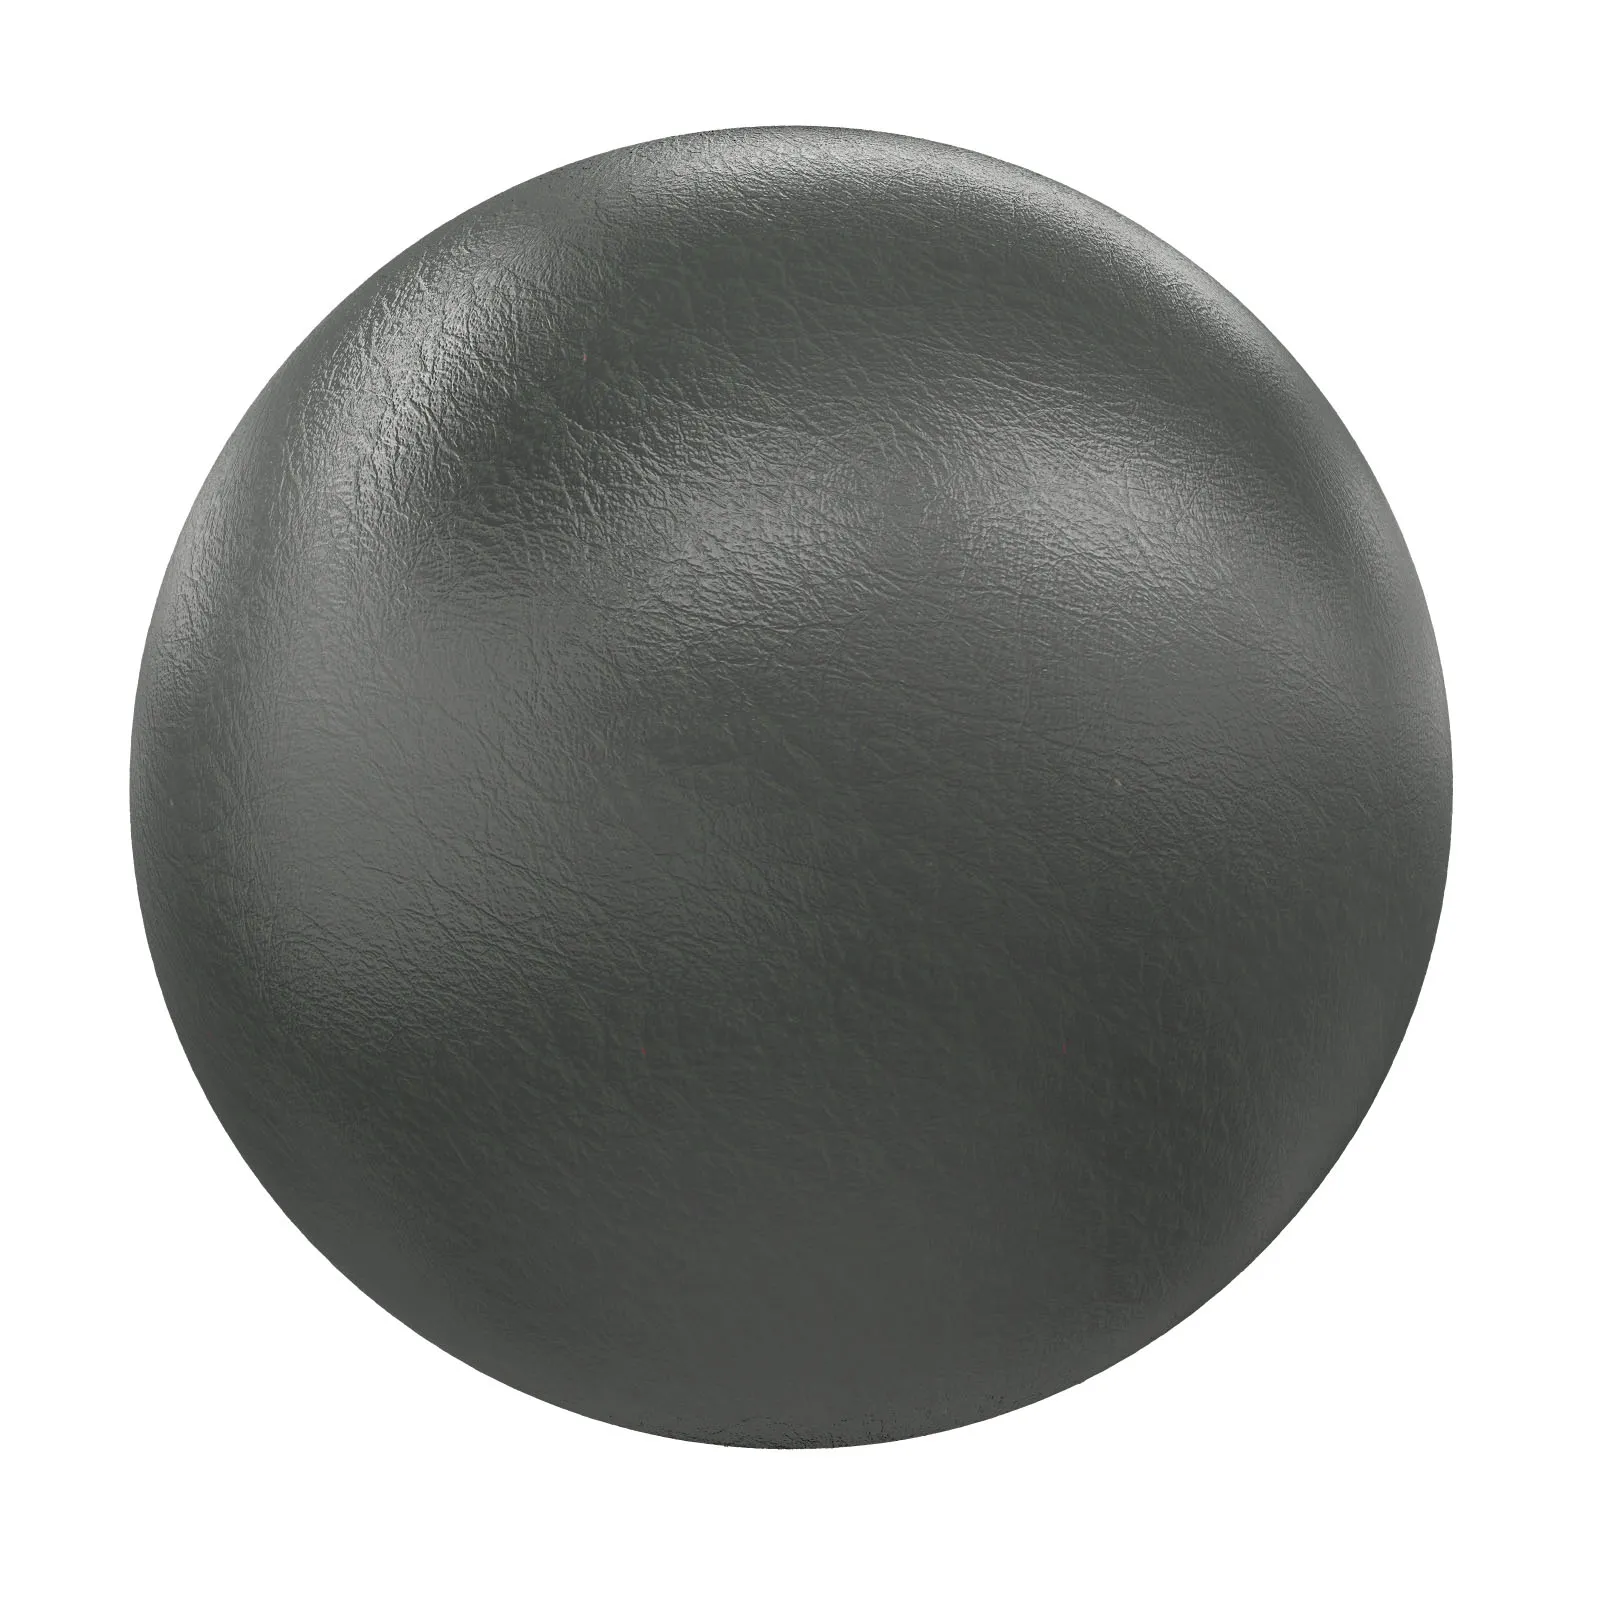 PBR CGAXIS TEXTURES – LEATHER – Black Leather 13